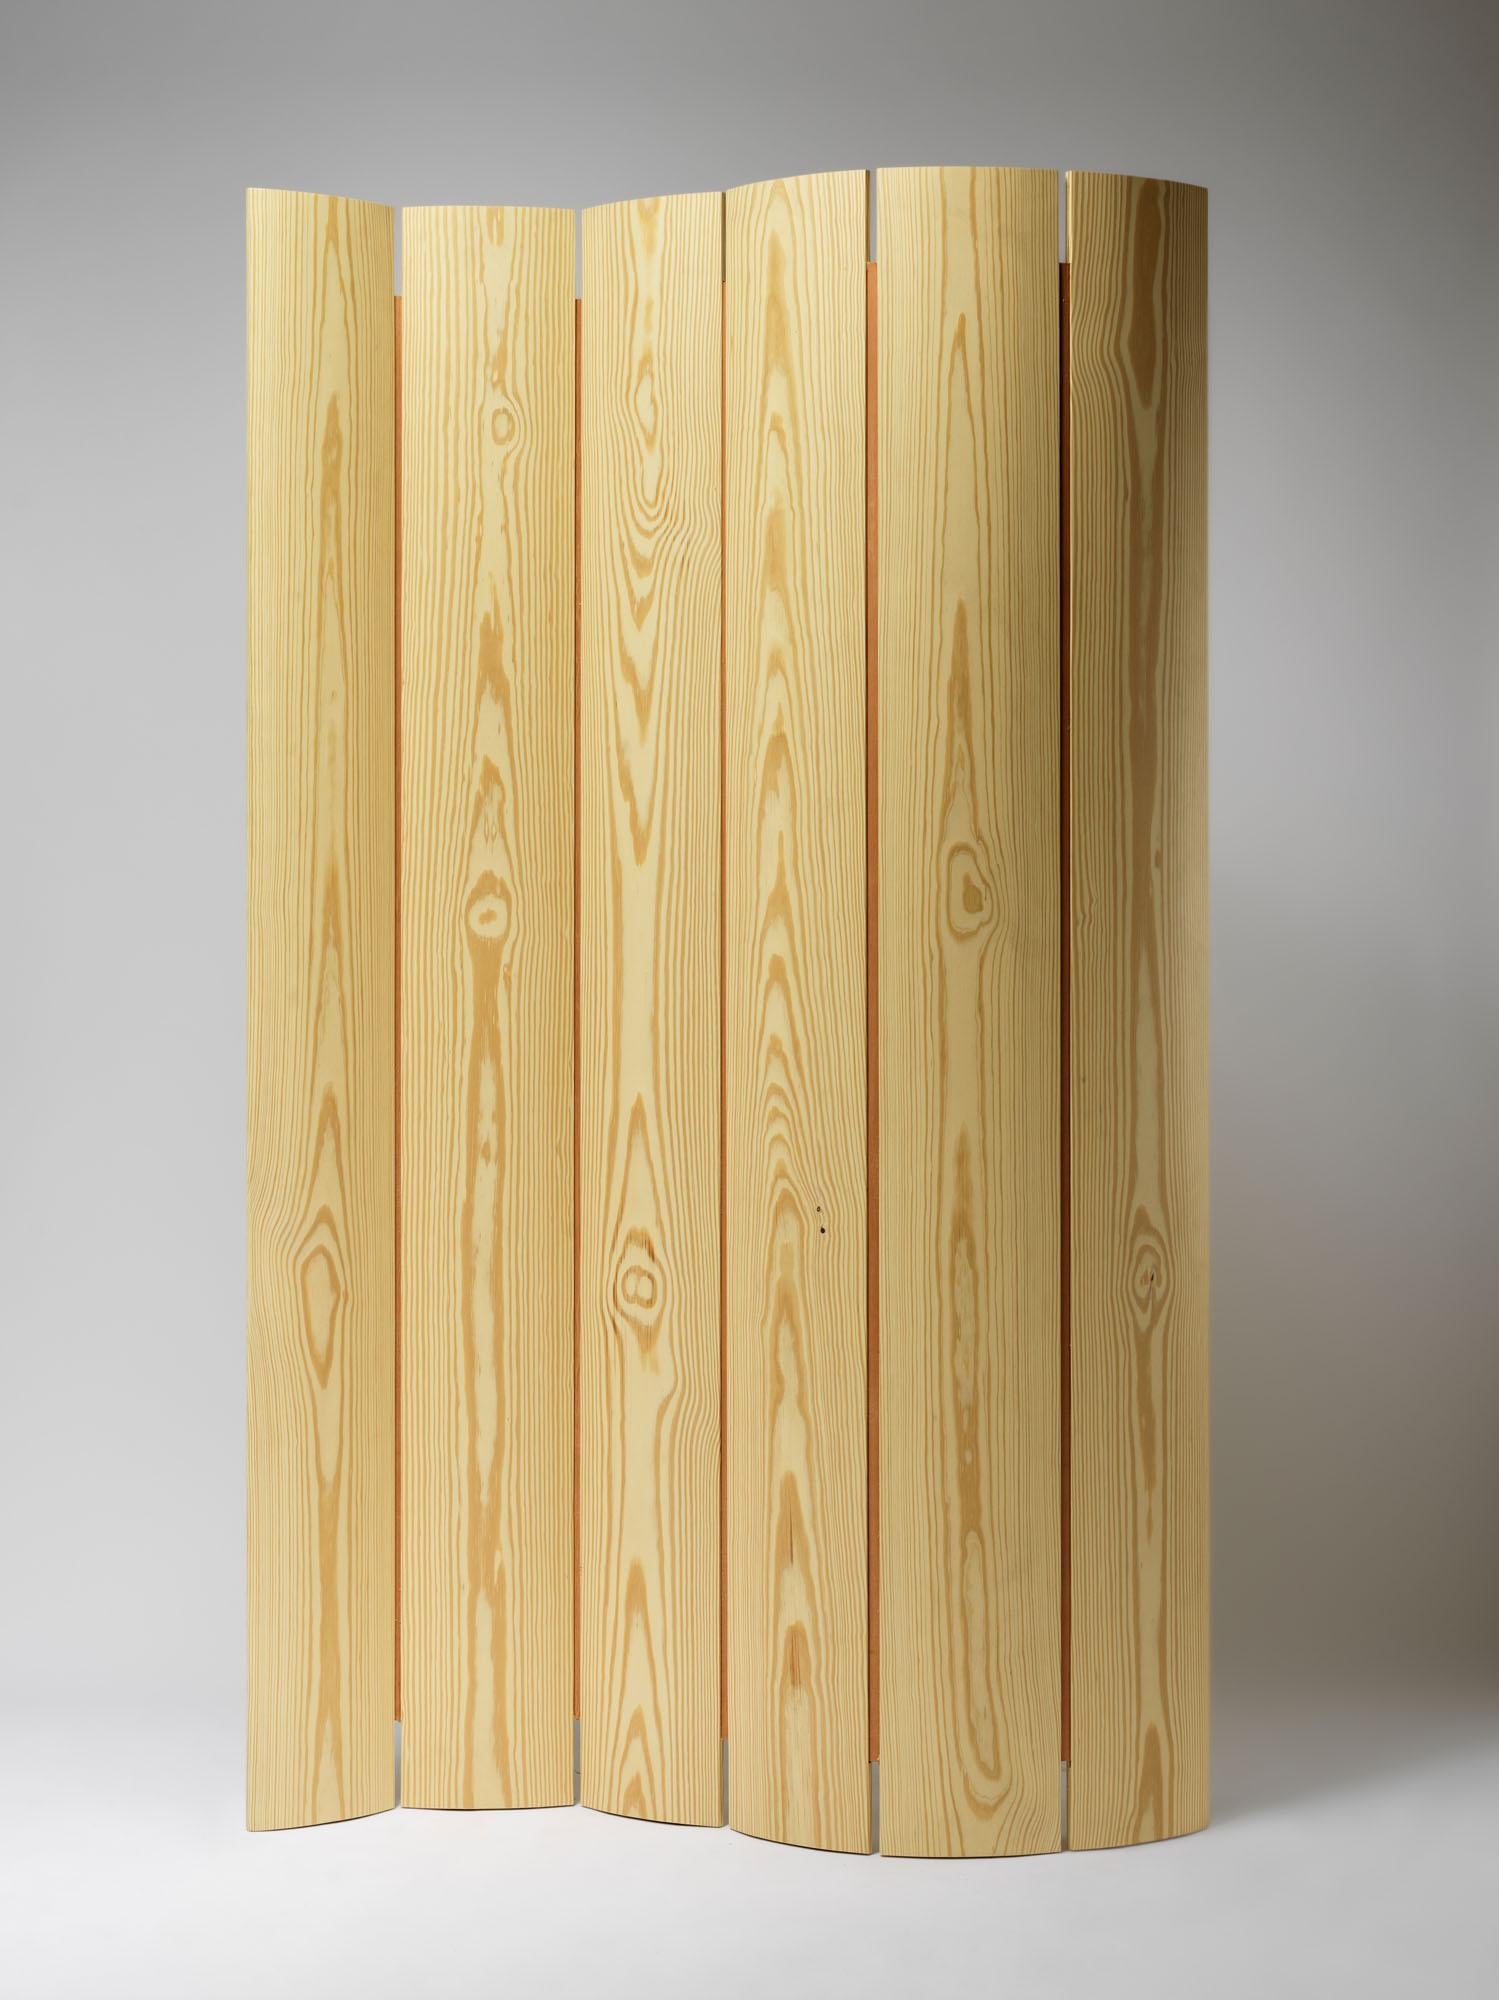 Nort Folding Screen by Tim Vranken
Materials: Yellow pine 
Dimensions: 183 x 120 cm

Tim Vranken is a Belgian furniture designer who focuses on solid, handmade furniture. Throughout his designs the use of pure materials and honest natural processes